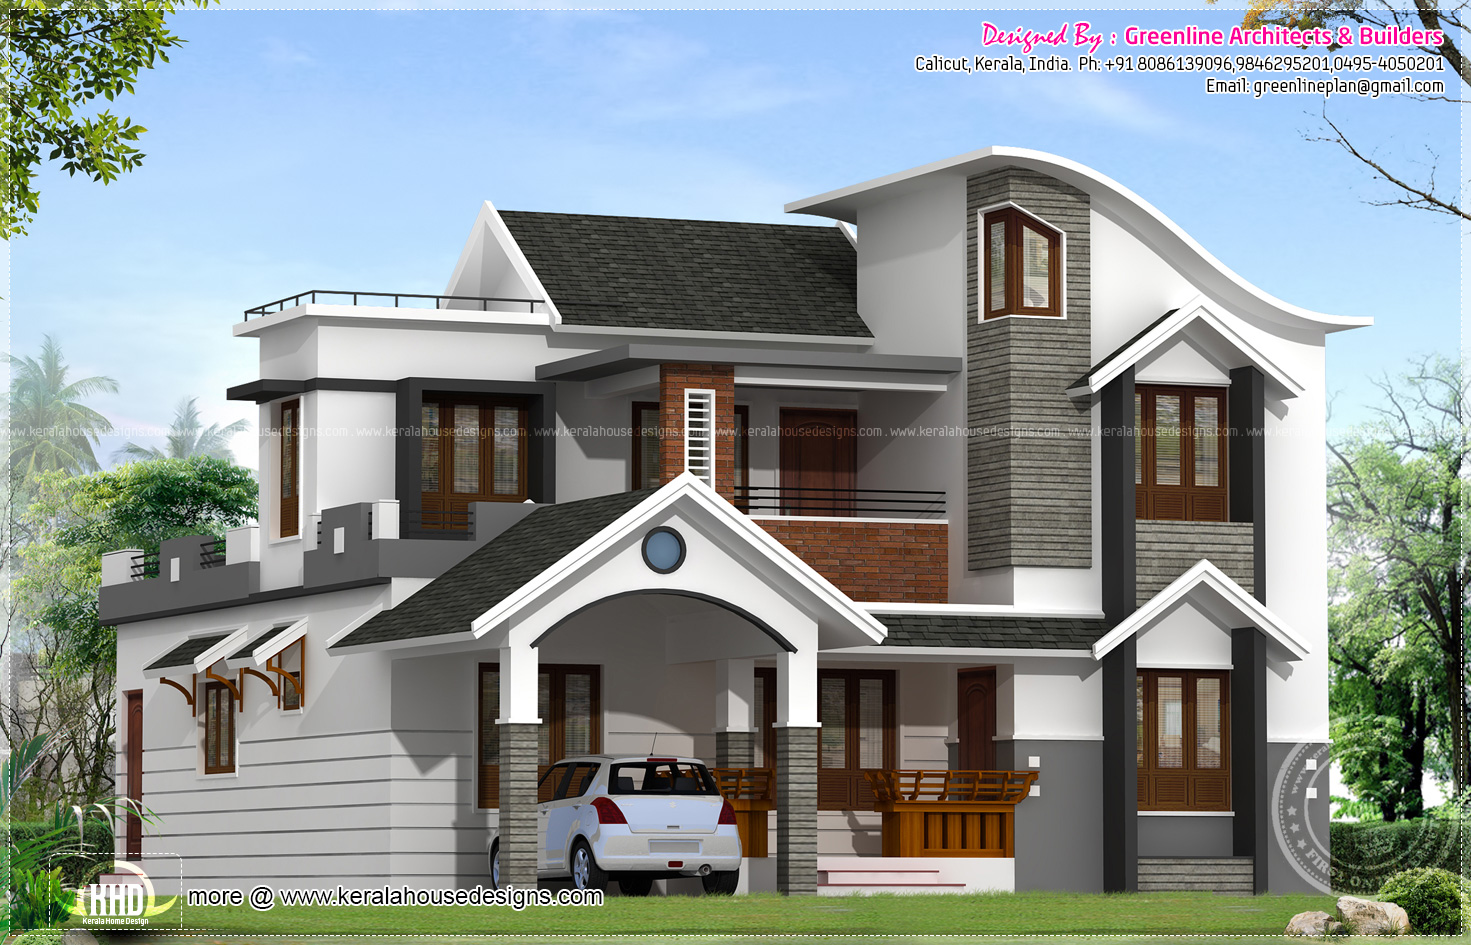  Modern  house  architecture in Kerala  House  Design  Plans 